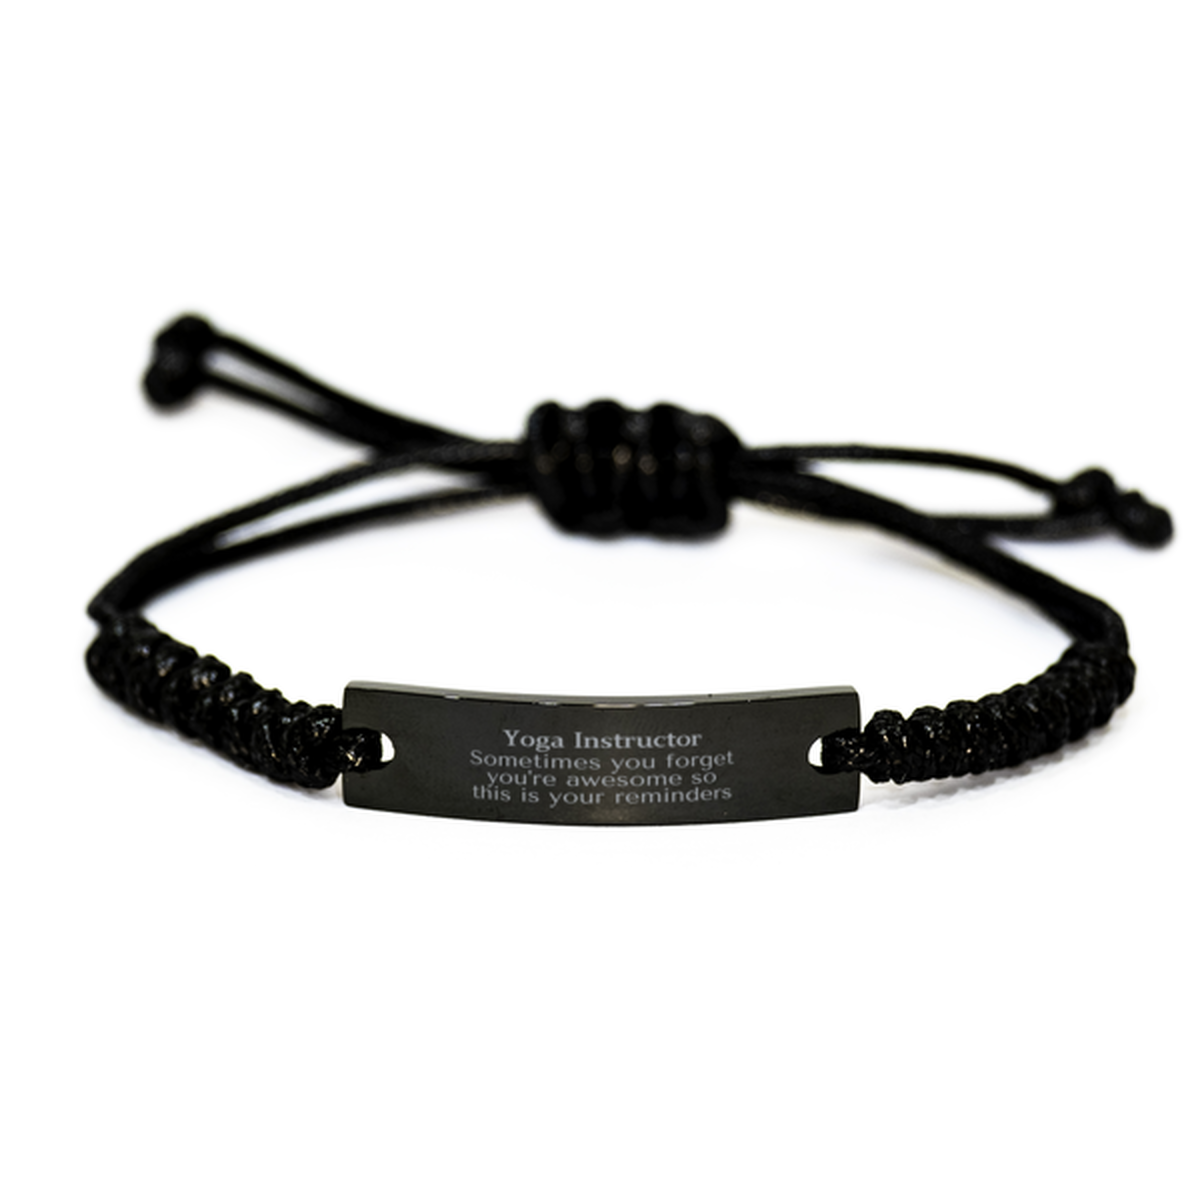 Sentimental Yoga Instructor Black Rope Bracelet, Yoga Instructor Sometimes you forget you're awesome so this is your reminders, Graduation Christmas Birthday Gifts for Yoga Instructor, Men, Women, Coworkers